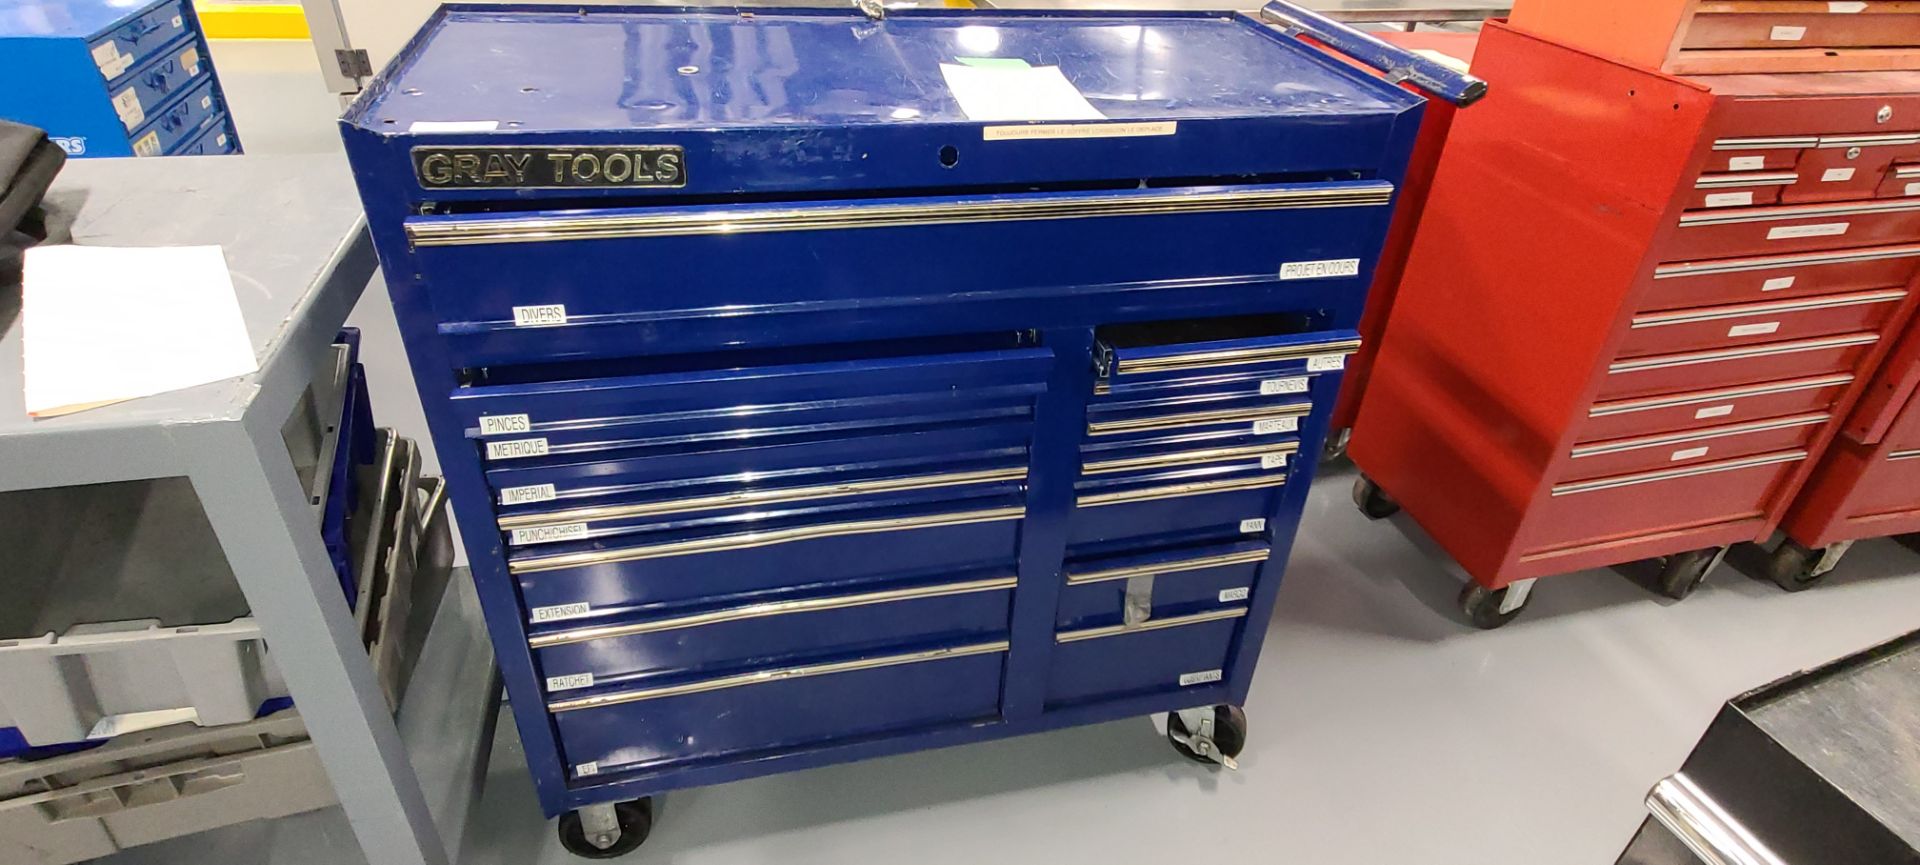 Gray Tools Rolling Tool Chest - Image 2 of 2